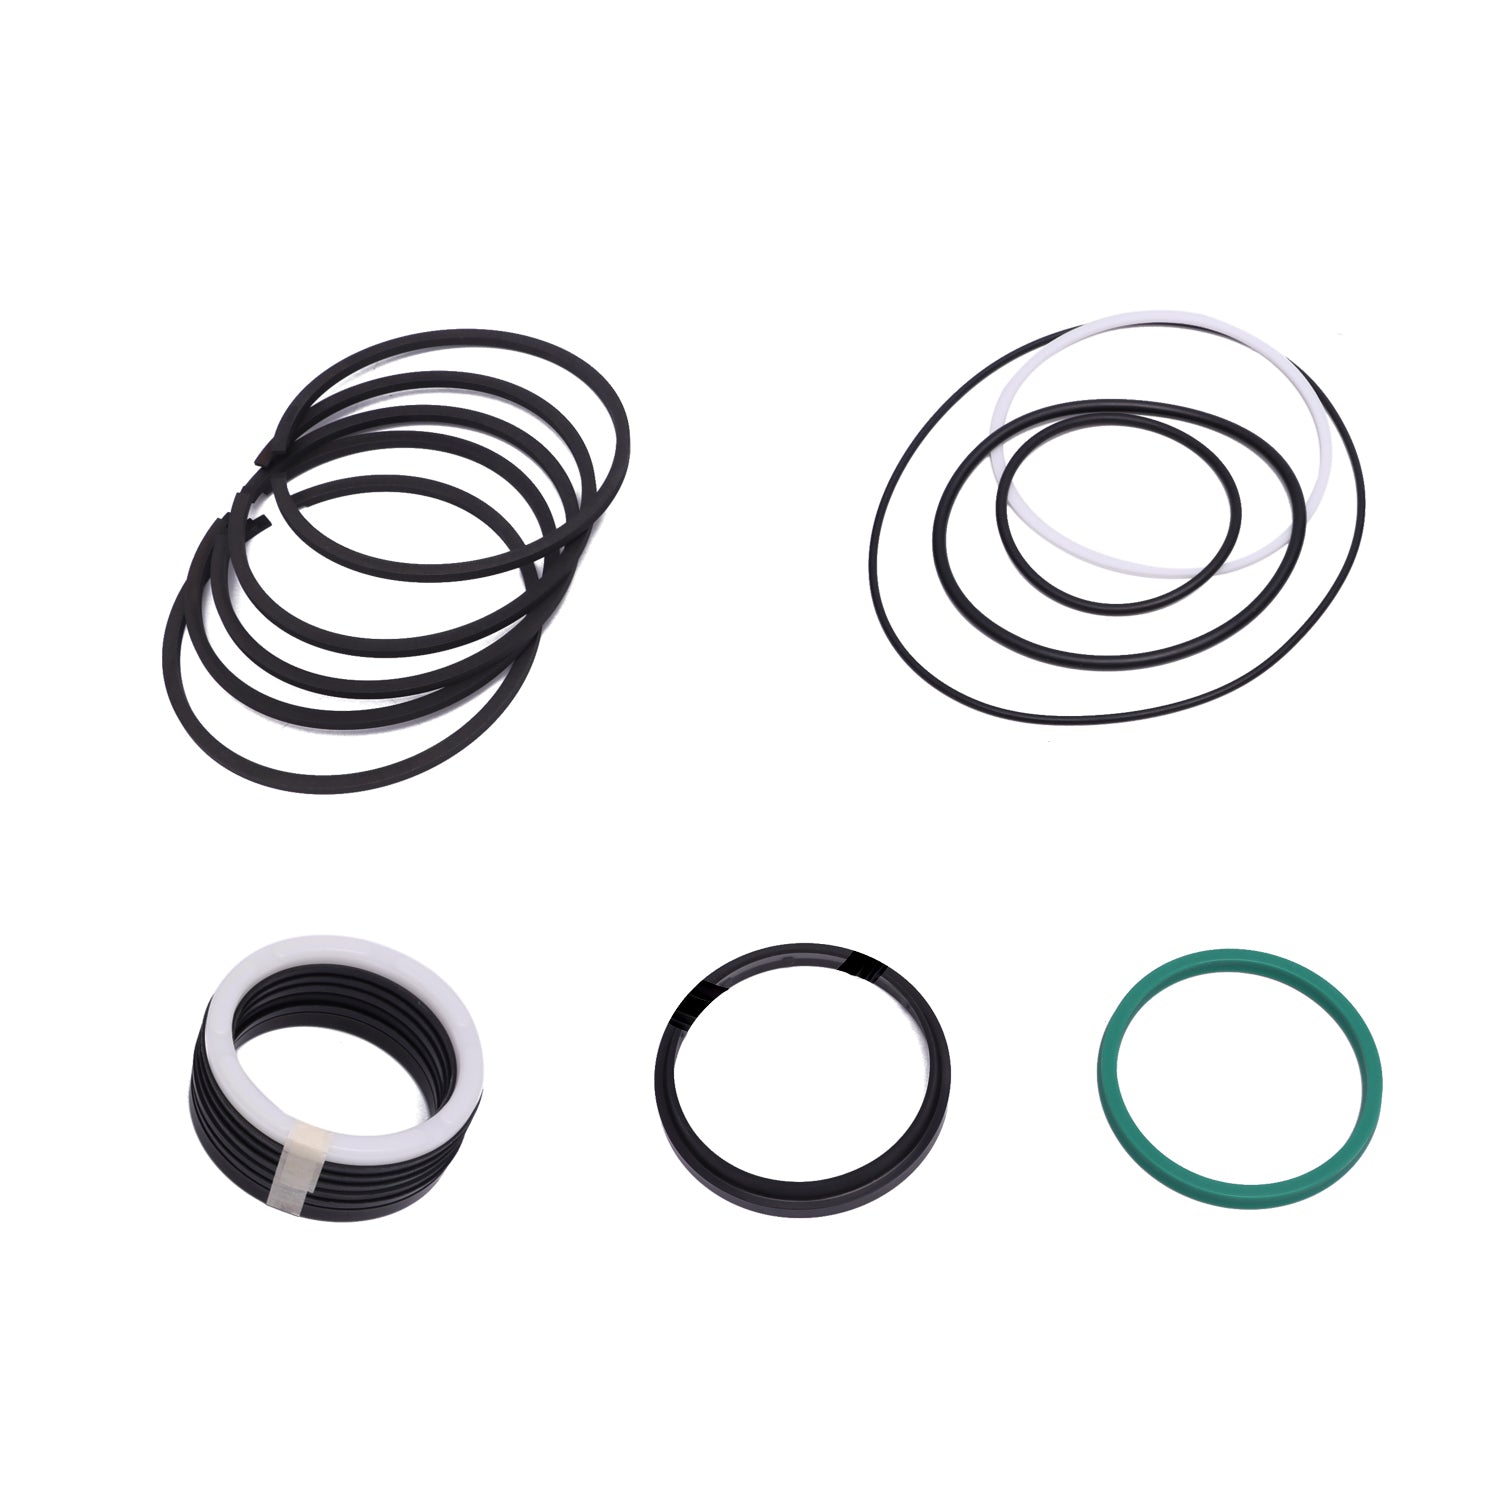 Differential Cylinder 10023479 (DN 130/80) Seal Kit for Schwing Truck-Mounted Concrete Pump, Main Hydraulic Oil Cylinder Sealing Kit for Schwing Stetter Boom Pump. - KUDUPARTS